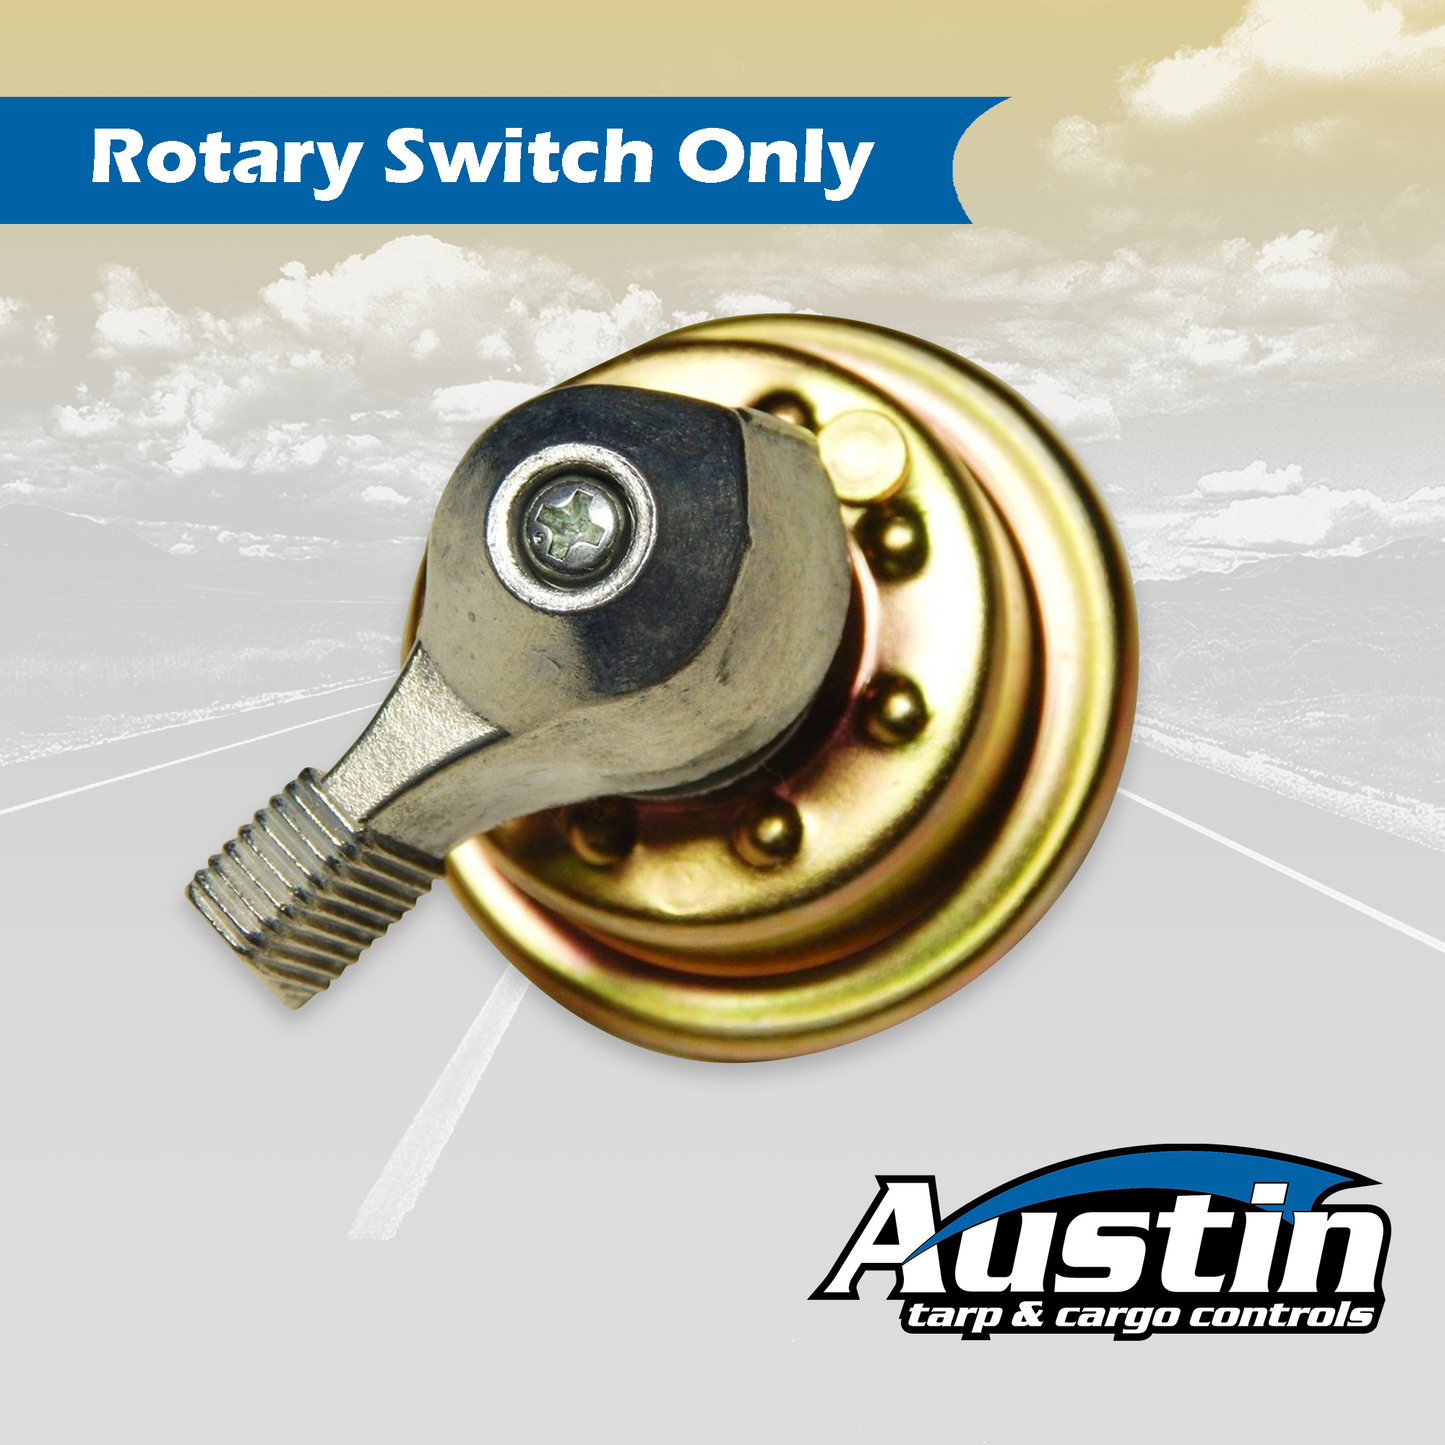 Rotary Switch Only